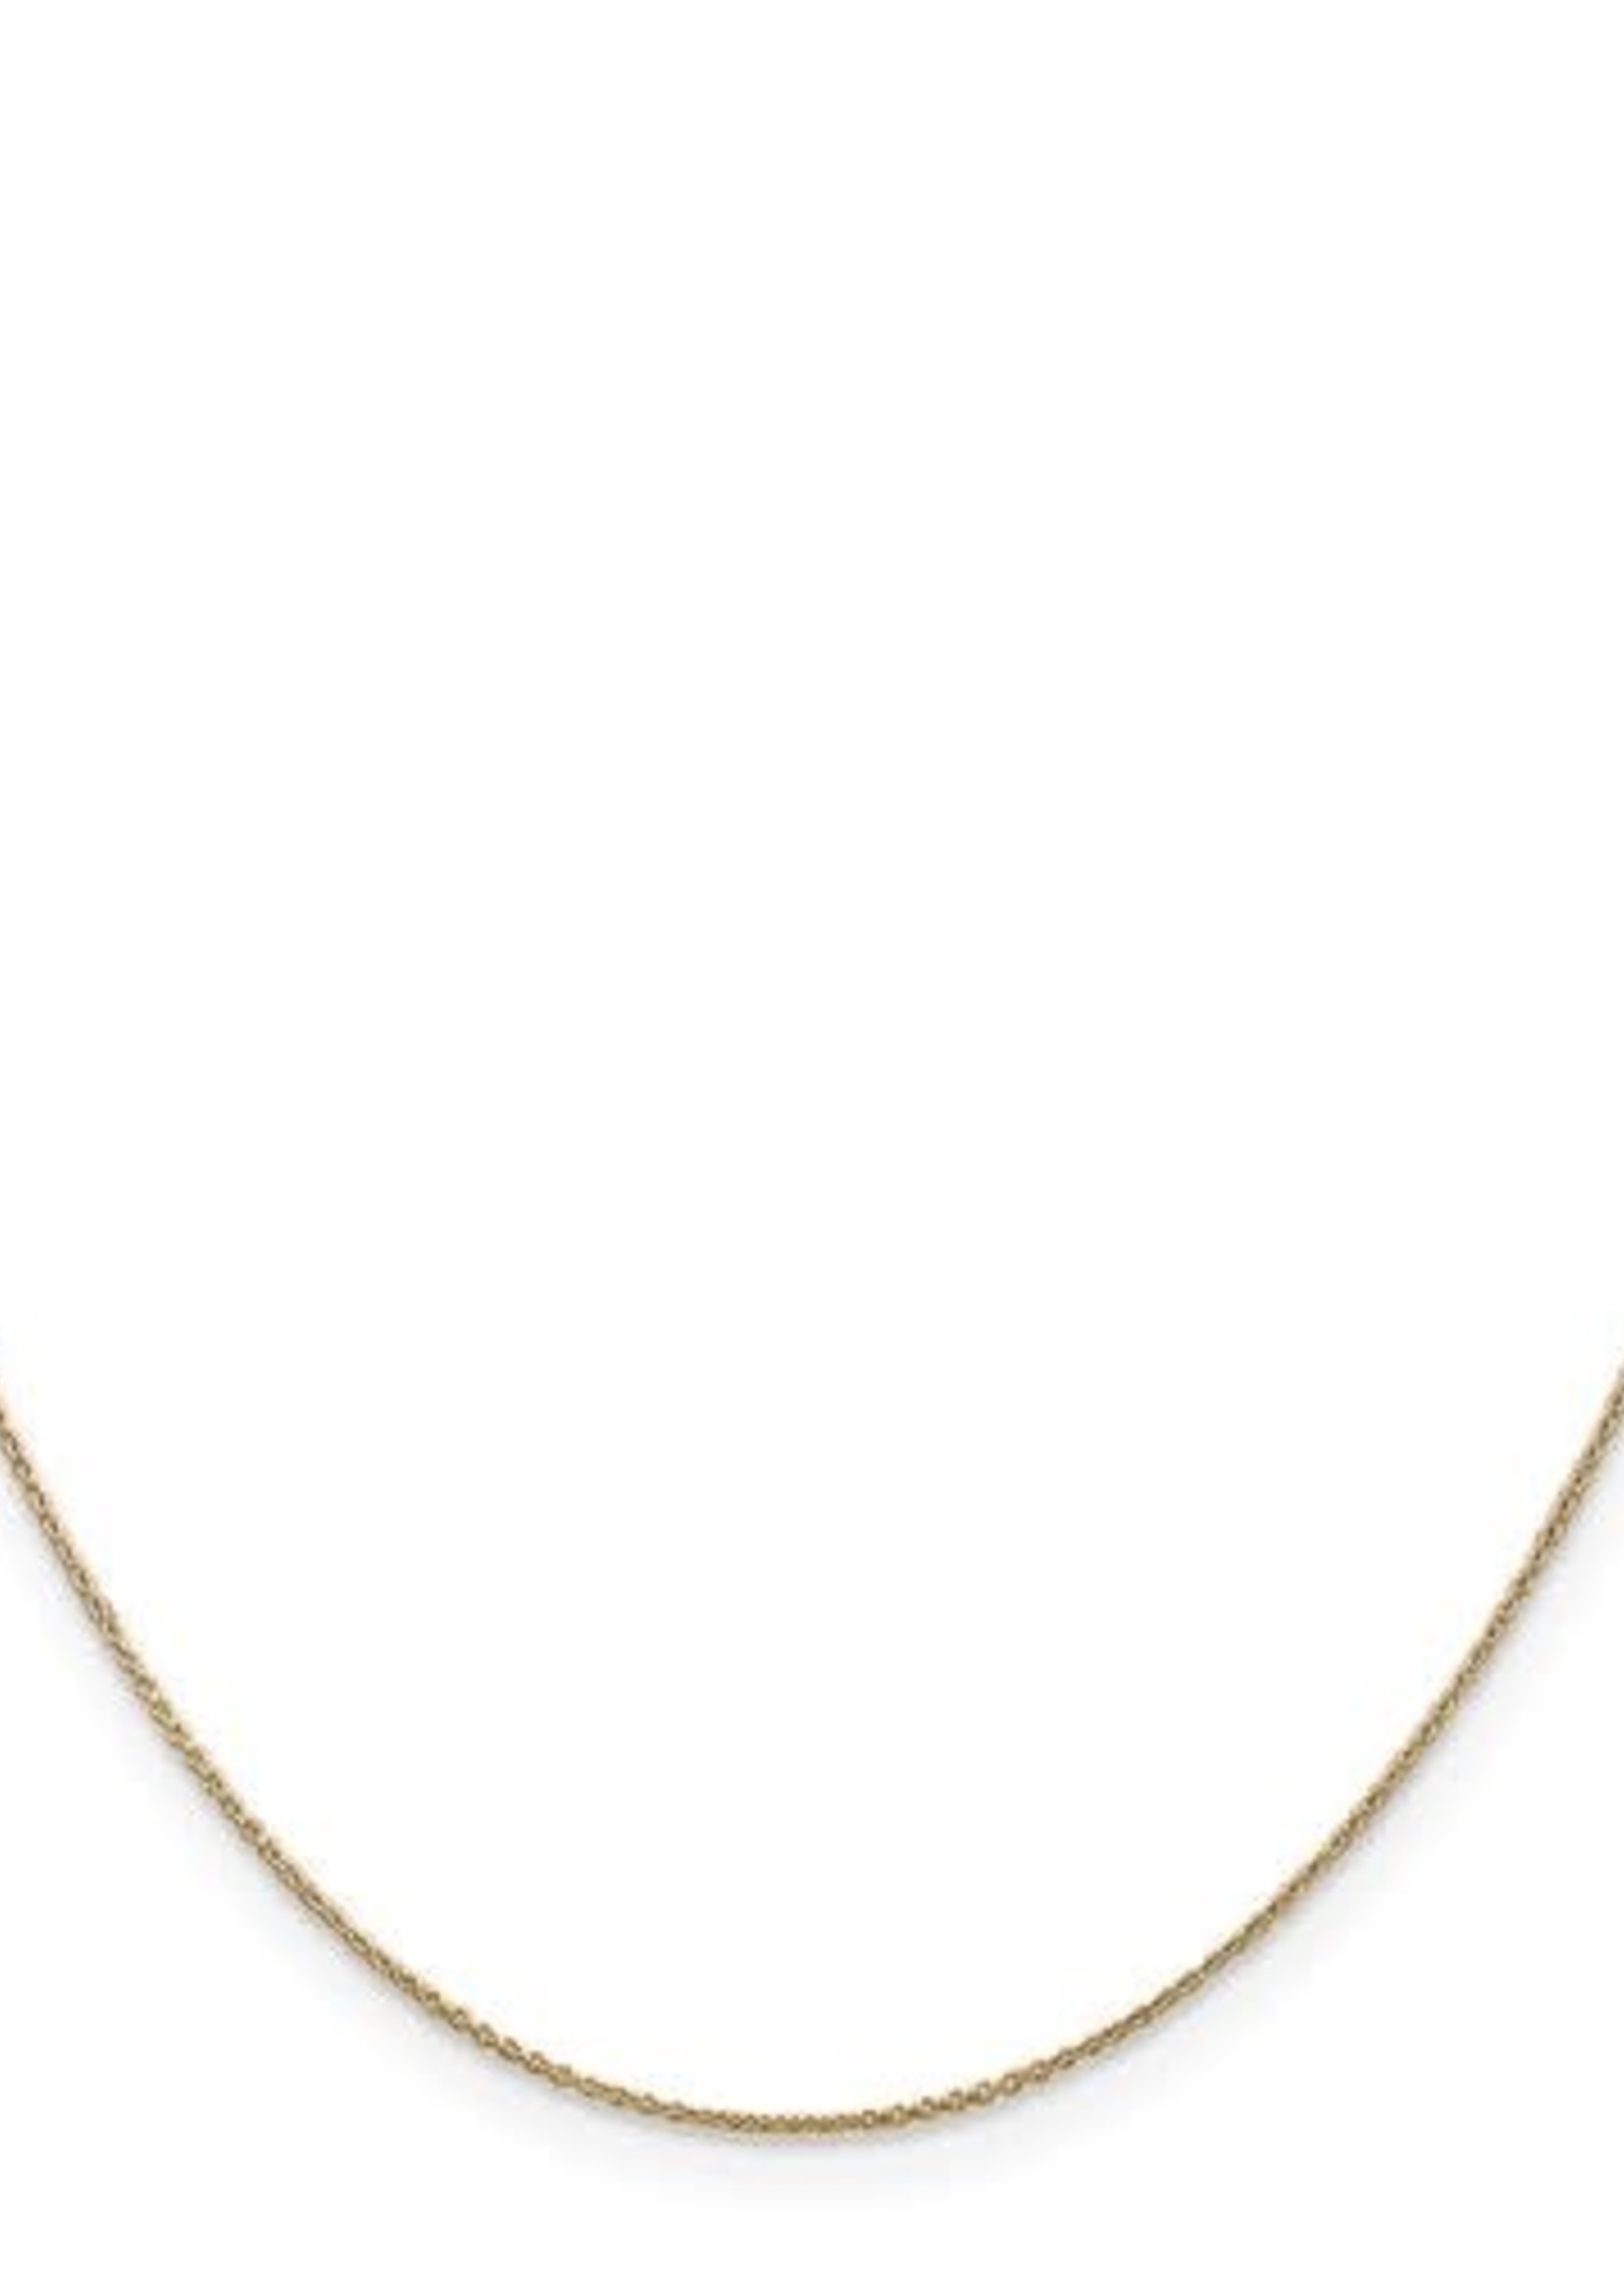 LESLIE'S 14K 18" 0.8mm Round Cable Chain 1g